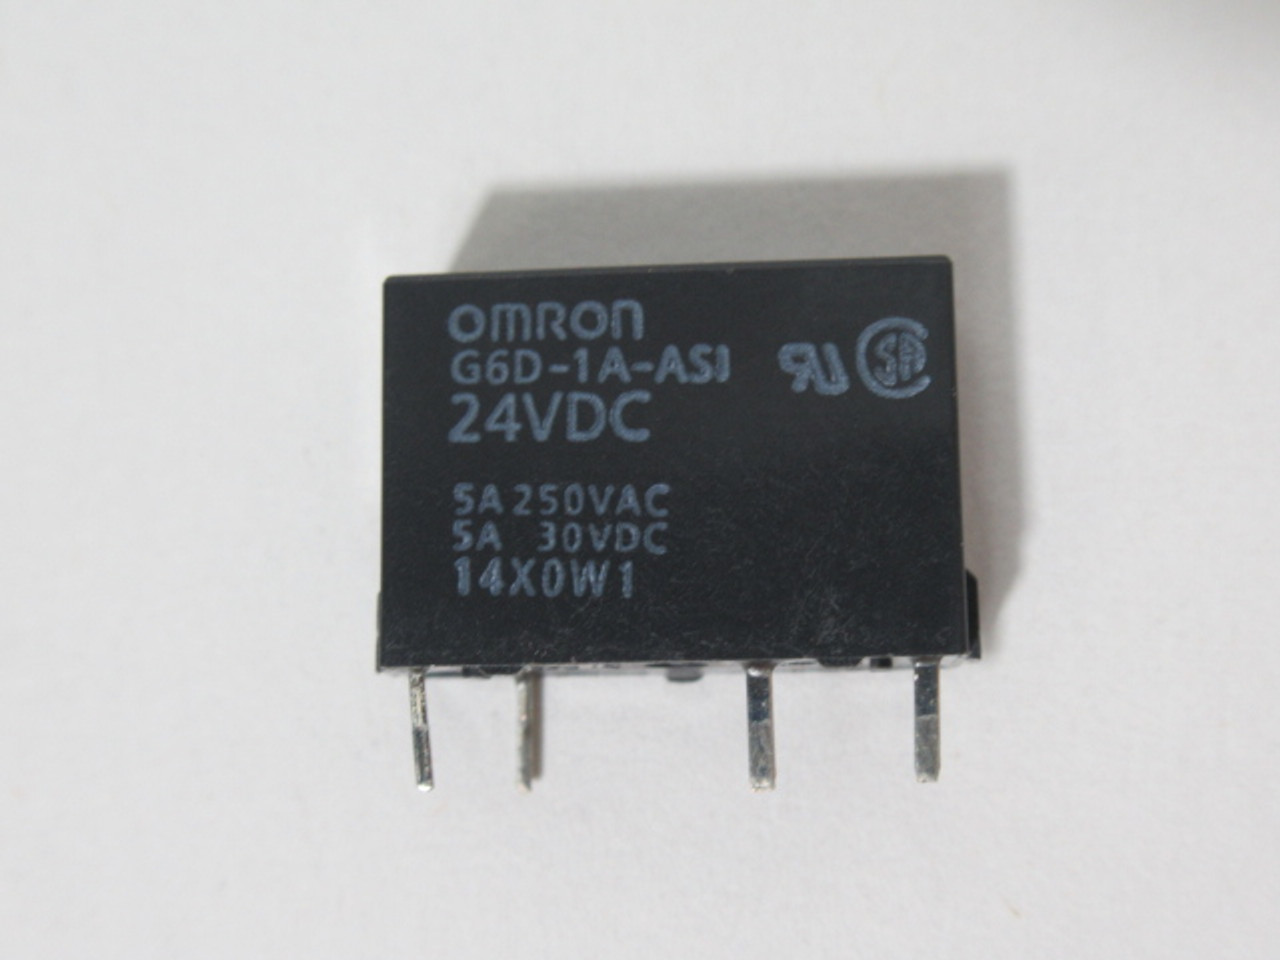 Omron G6D-F4B Terminal Relay 24VDC 3A C/W Omron G6D-1A-ASI Relay USED